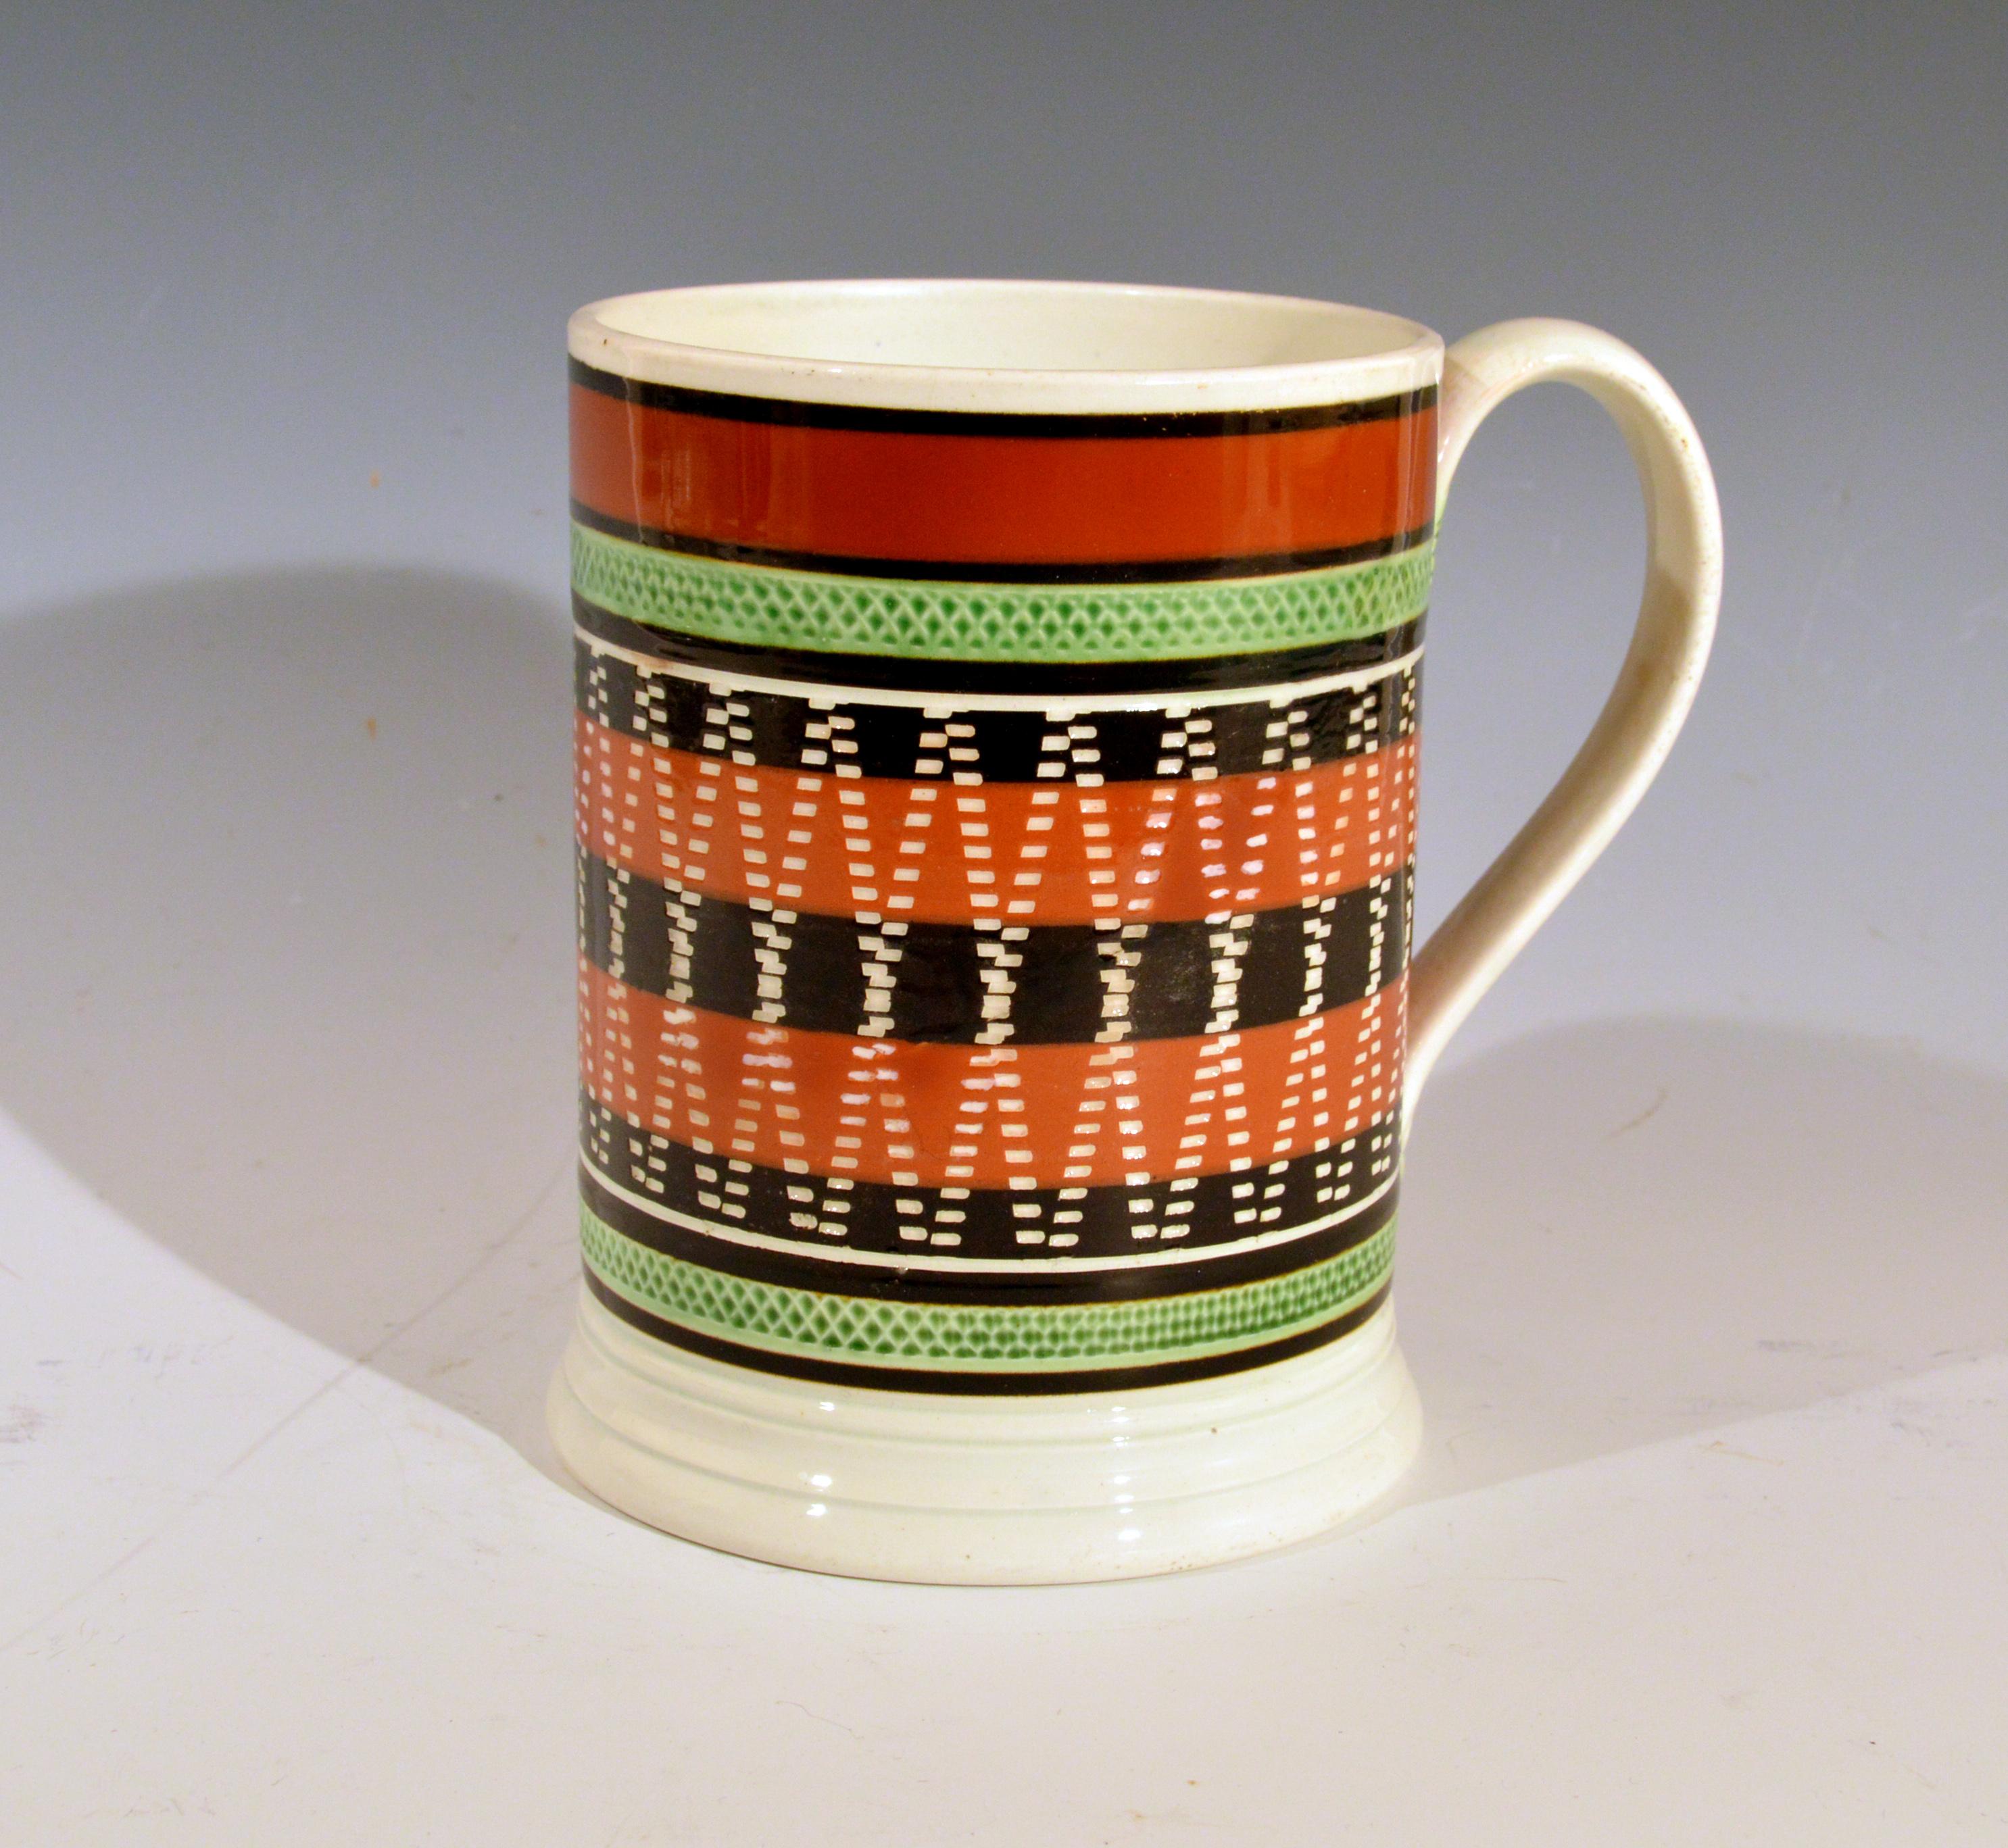 Mocha pottery banded engine-turned Pearlware tankard,
circa 1820 

The unusually decorated engine turned mocha pottery tankard with a series of five bands around the center in brown and ochre with a rouletted band above and below in green. The